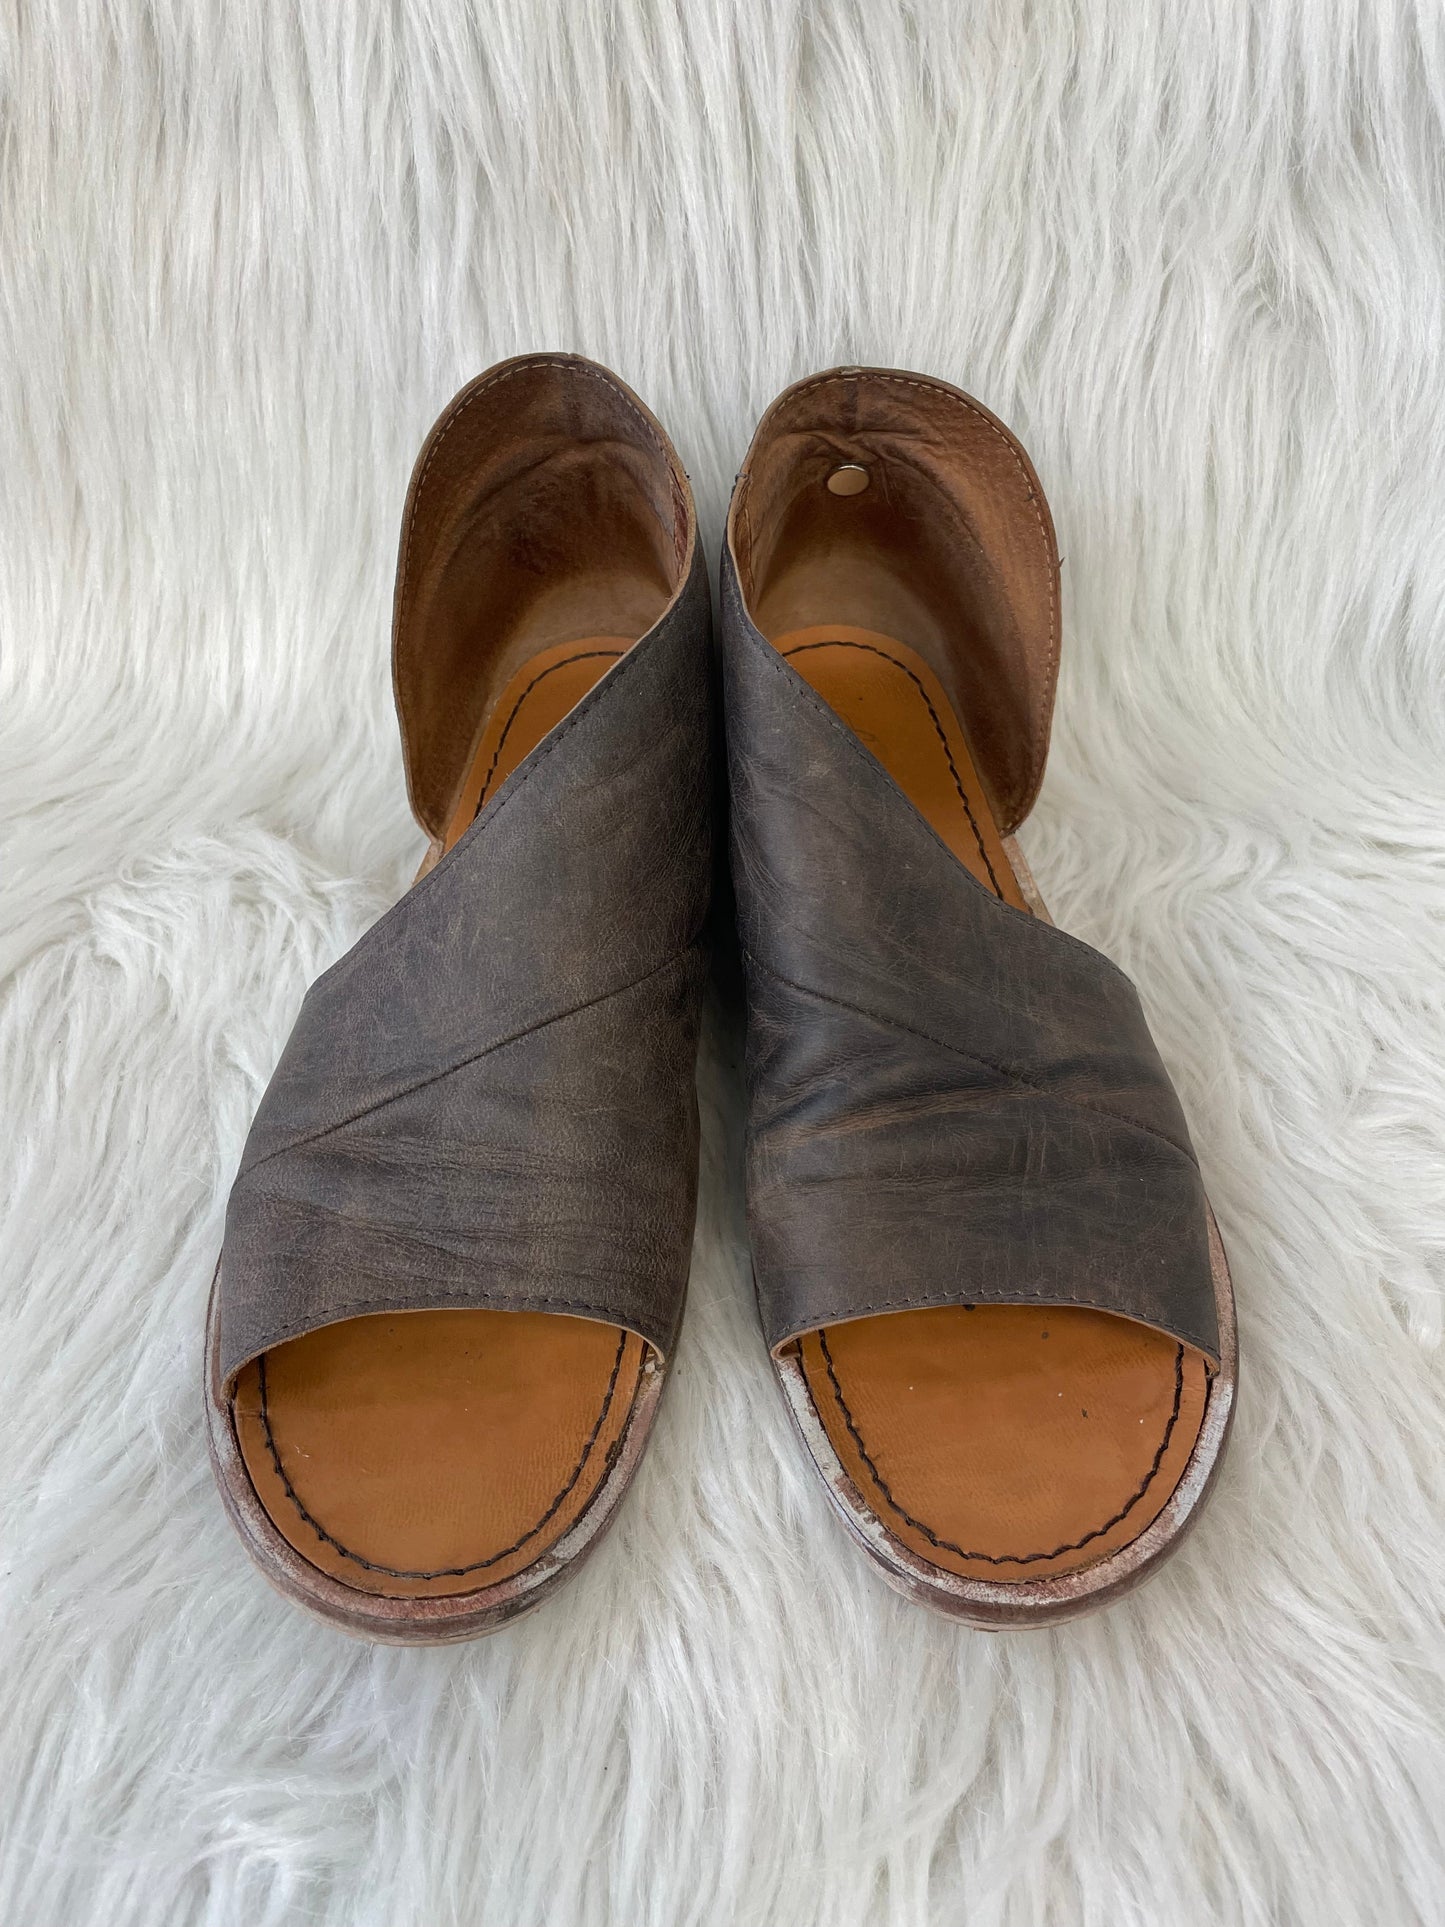 Brown Shoes Flats Free People, Size 8.5